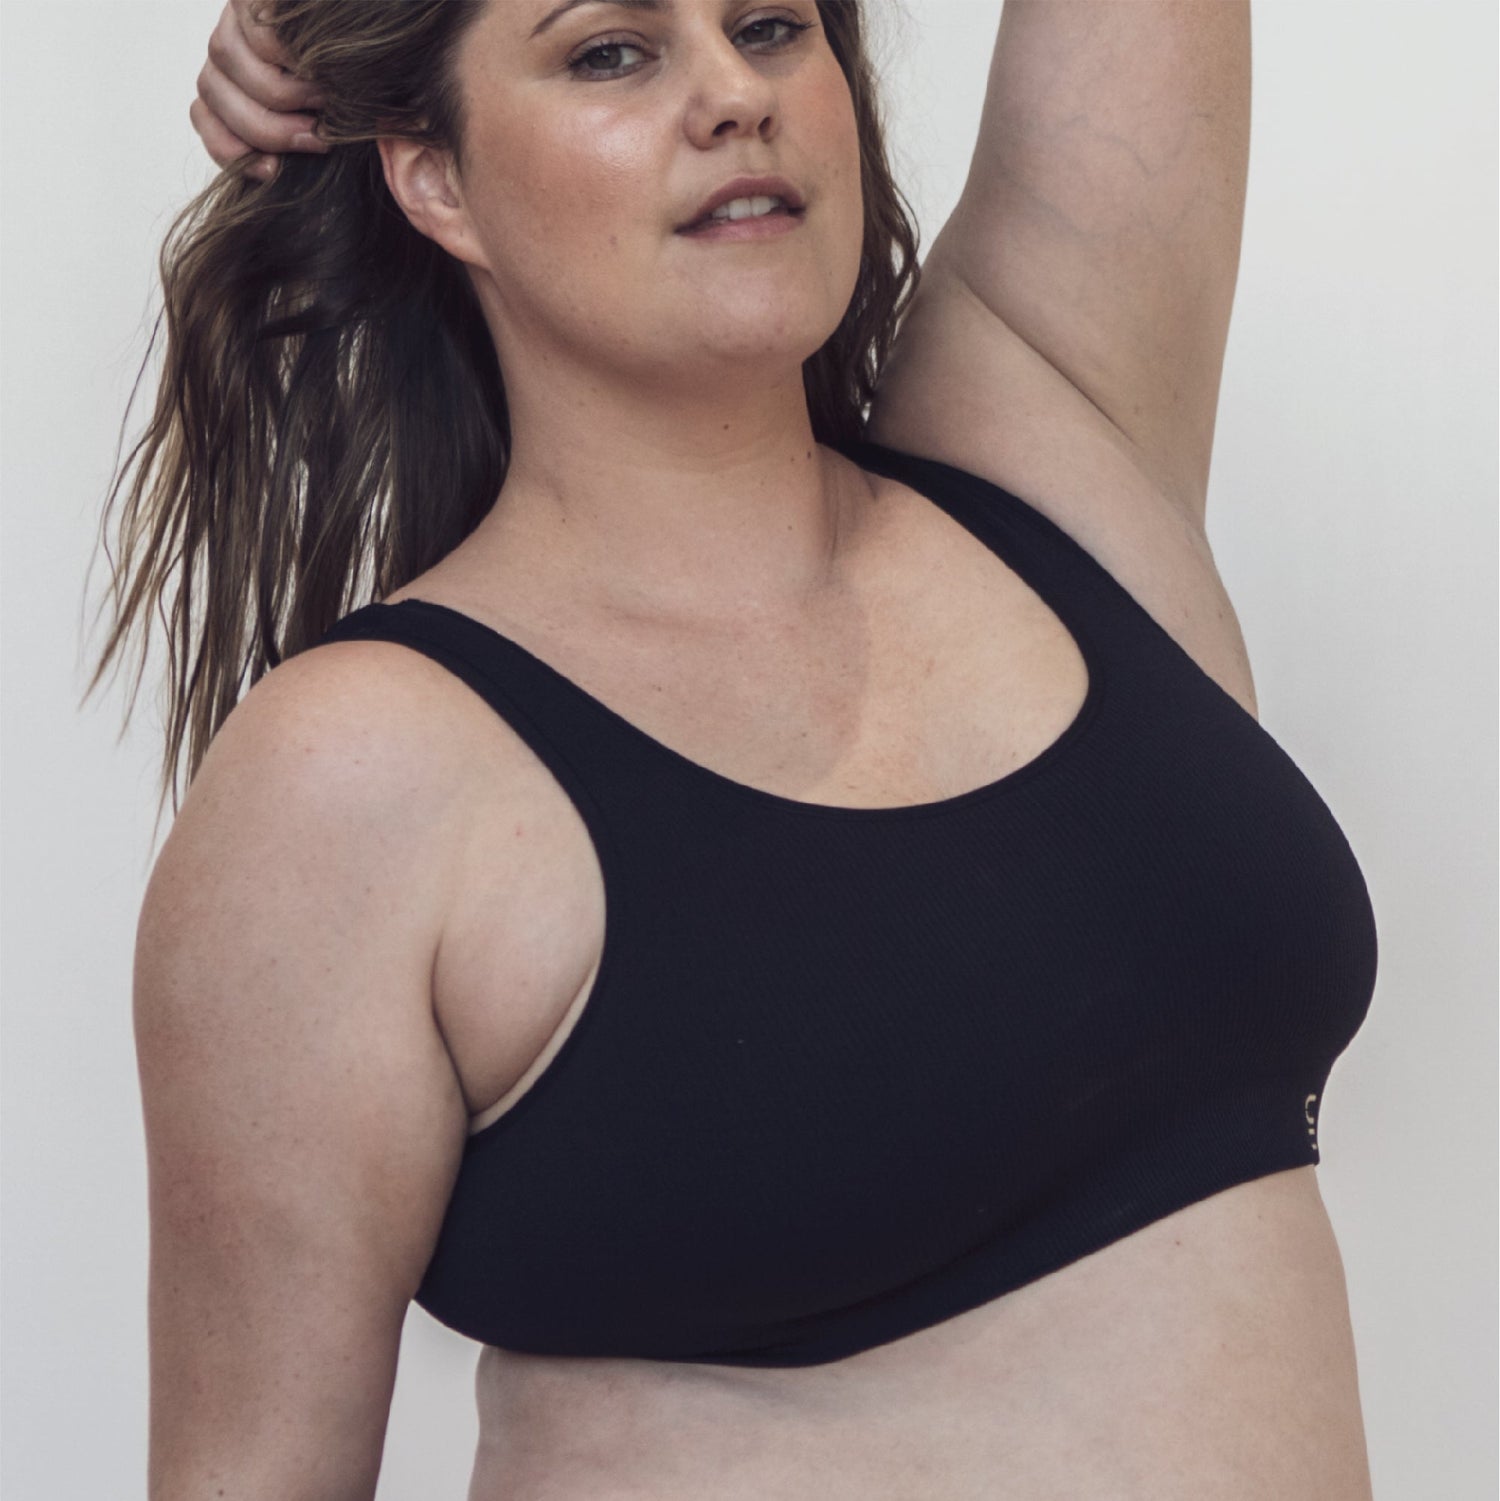 Sustainable, ethically produced Black bra crop by Underwear for Humanity: stronger support for larger bust, D - GG cup sizes. Recycled materials, knitted bra and band, seamfree, made from recycled nylon. Models wear the D+ Crop